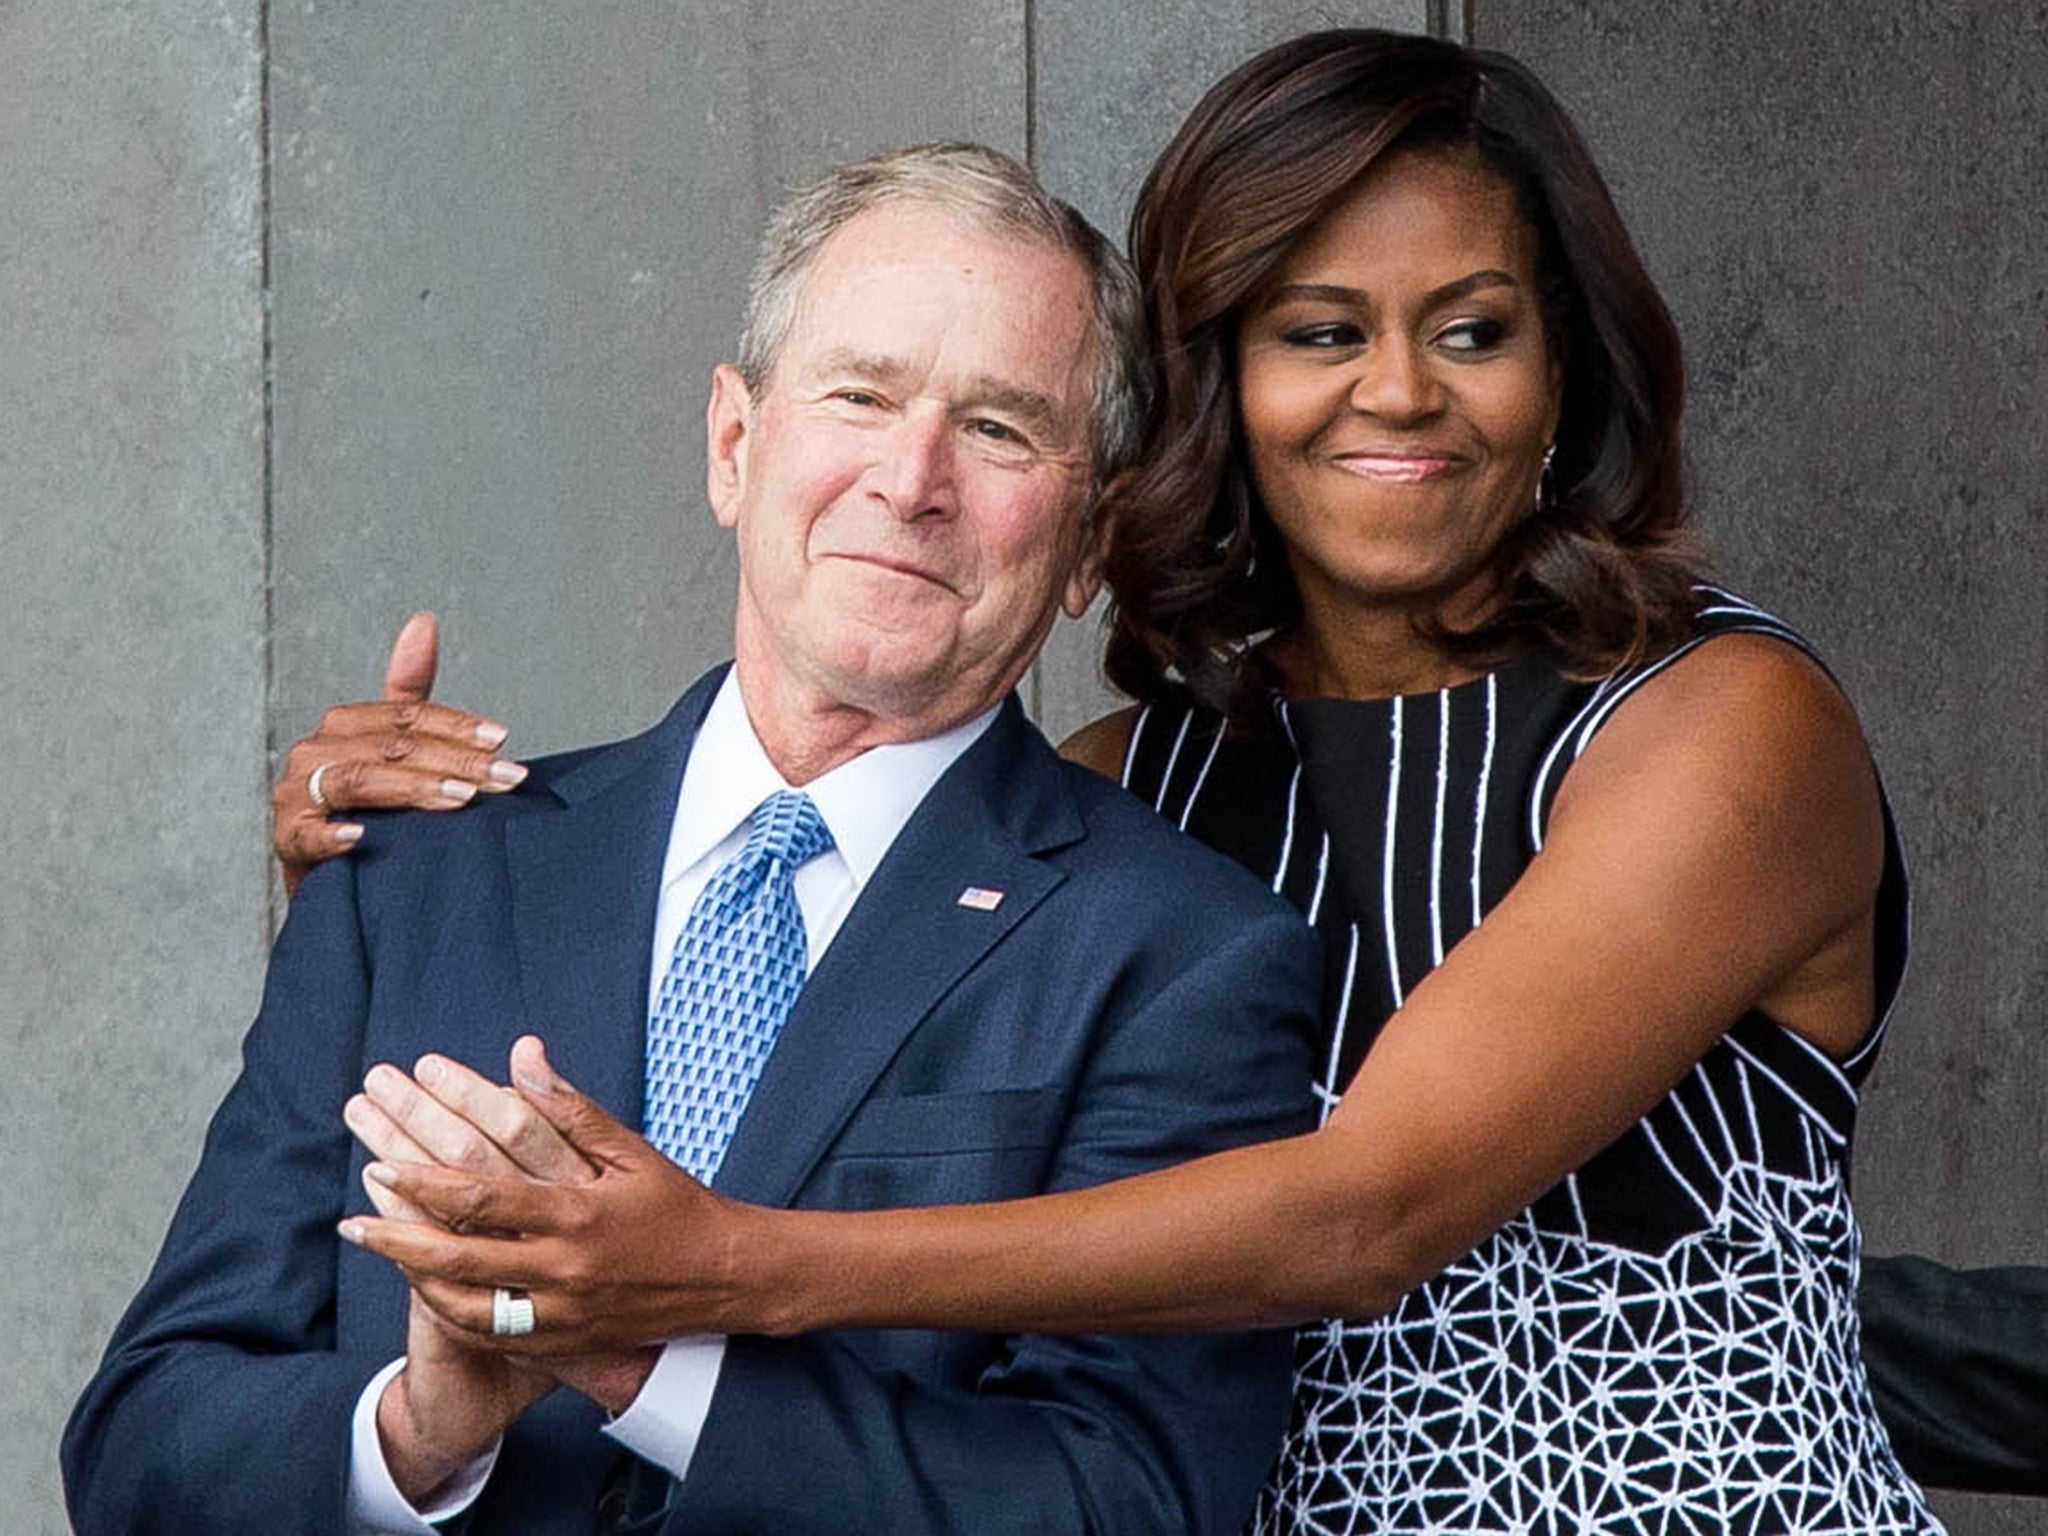 Michelle Obama and George W Bush hug at a opening ceremony for the Smithsonian National Museum of African American History and Culture in Washington in 2016